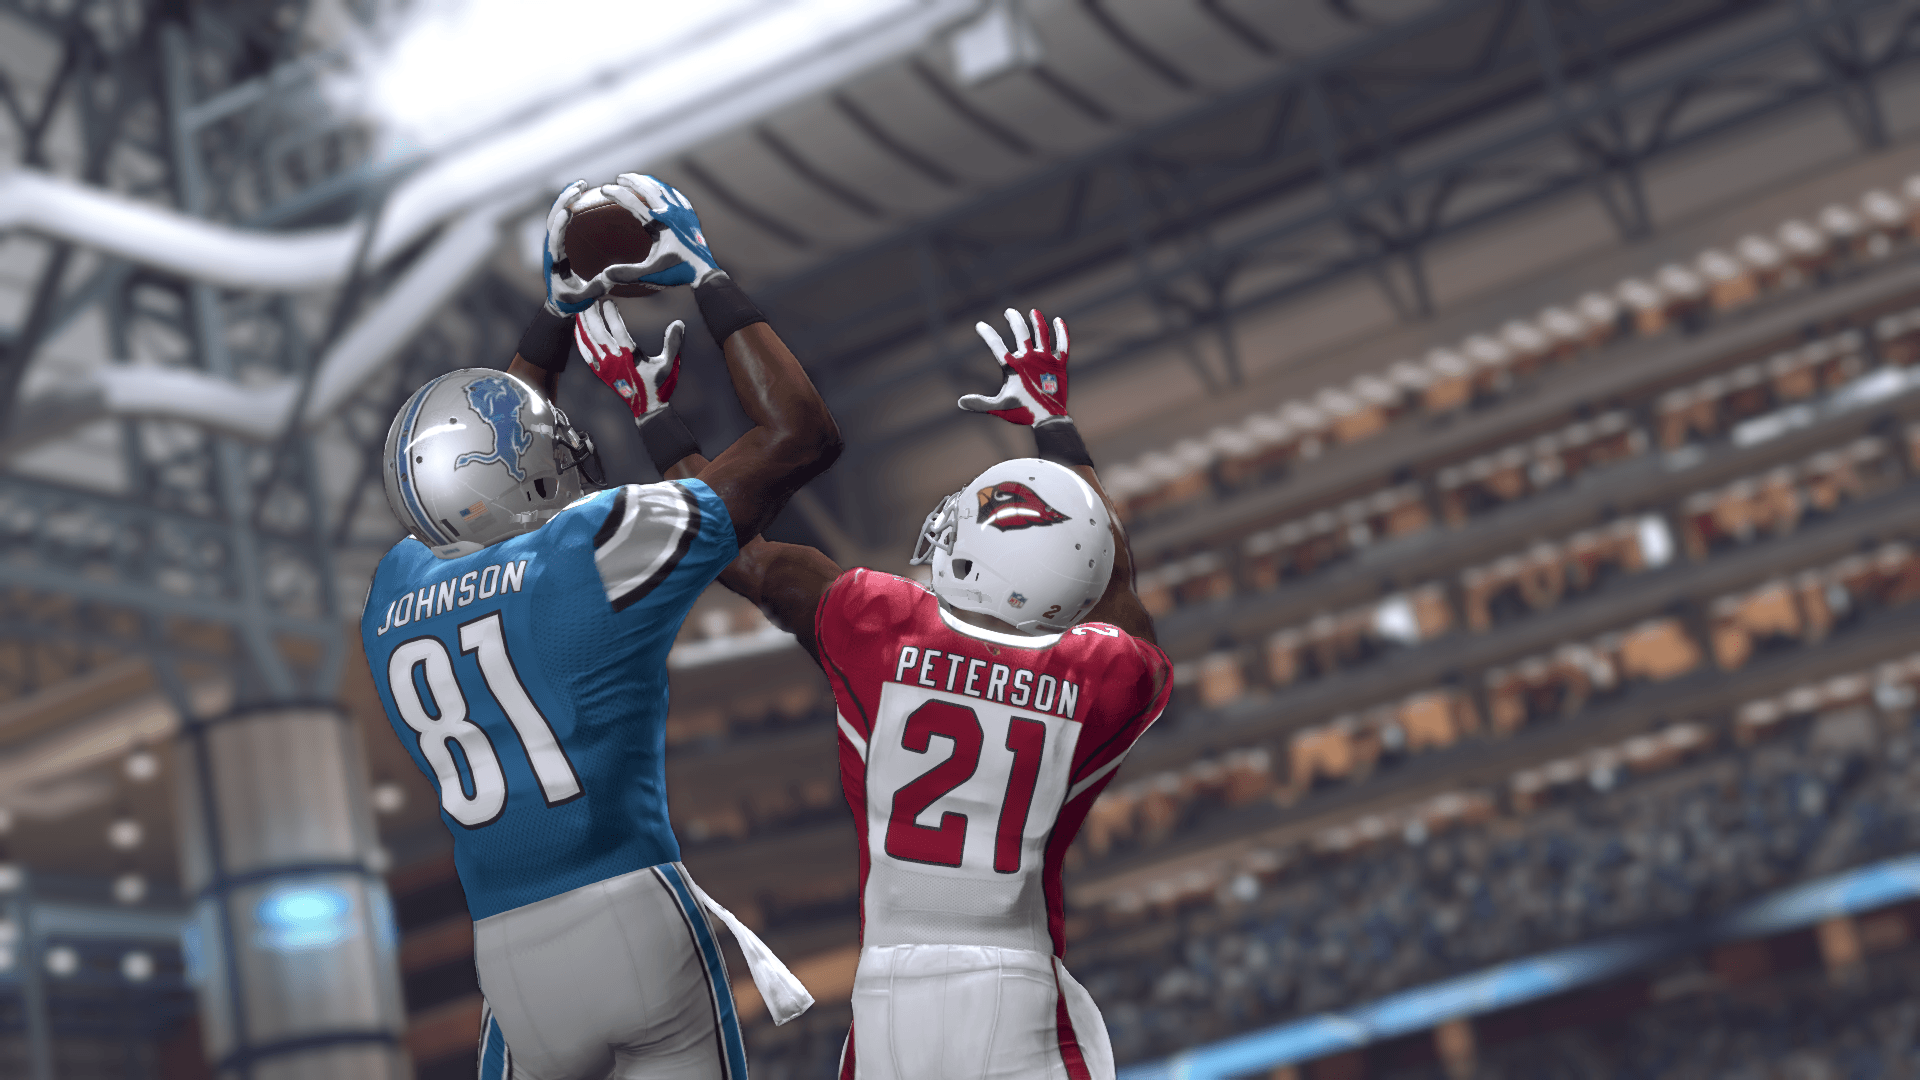 Wallpaper Blink of Madden NFL 16 HD Wallpaper HD for Android